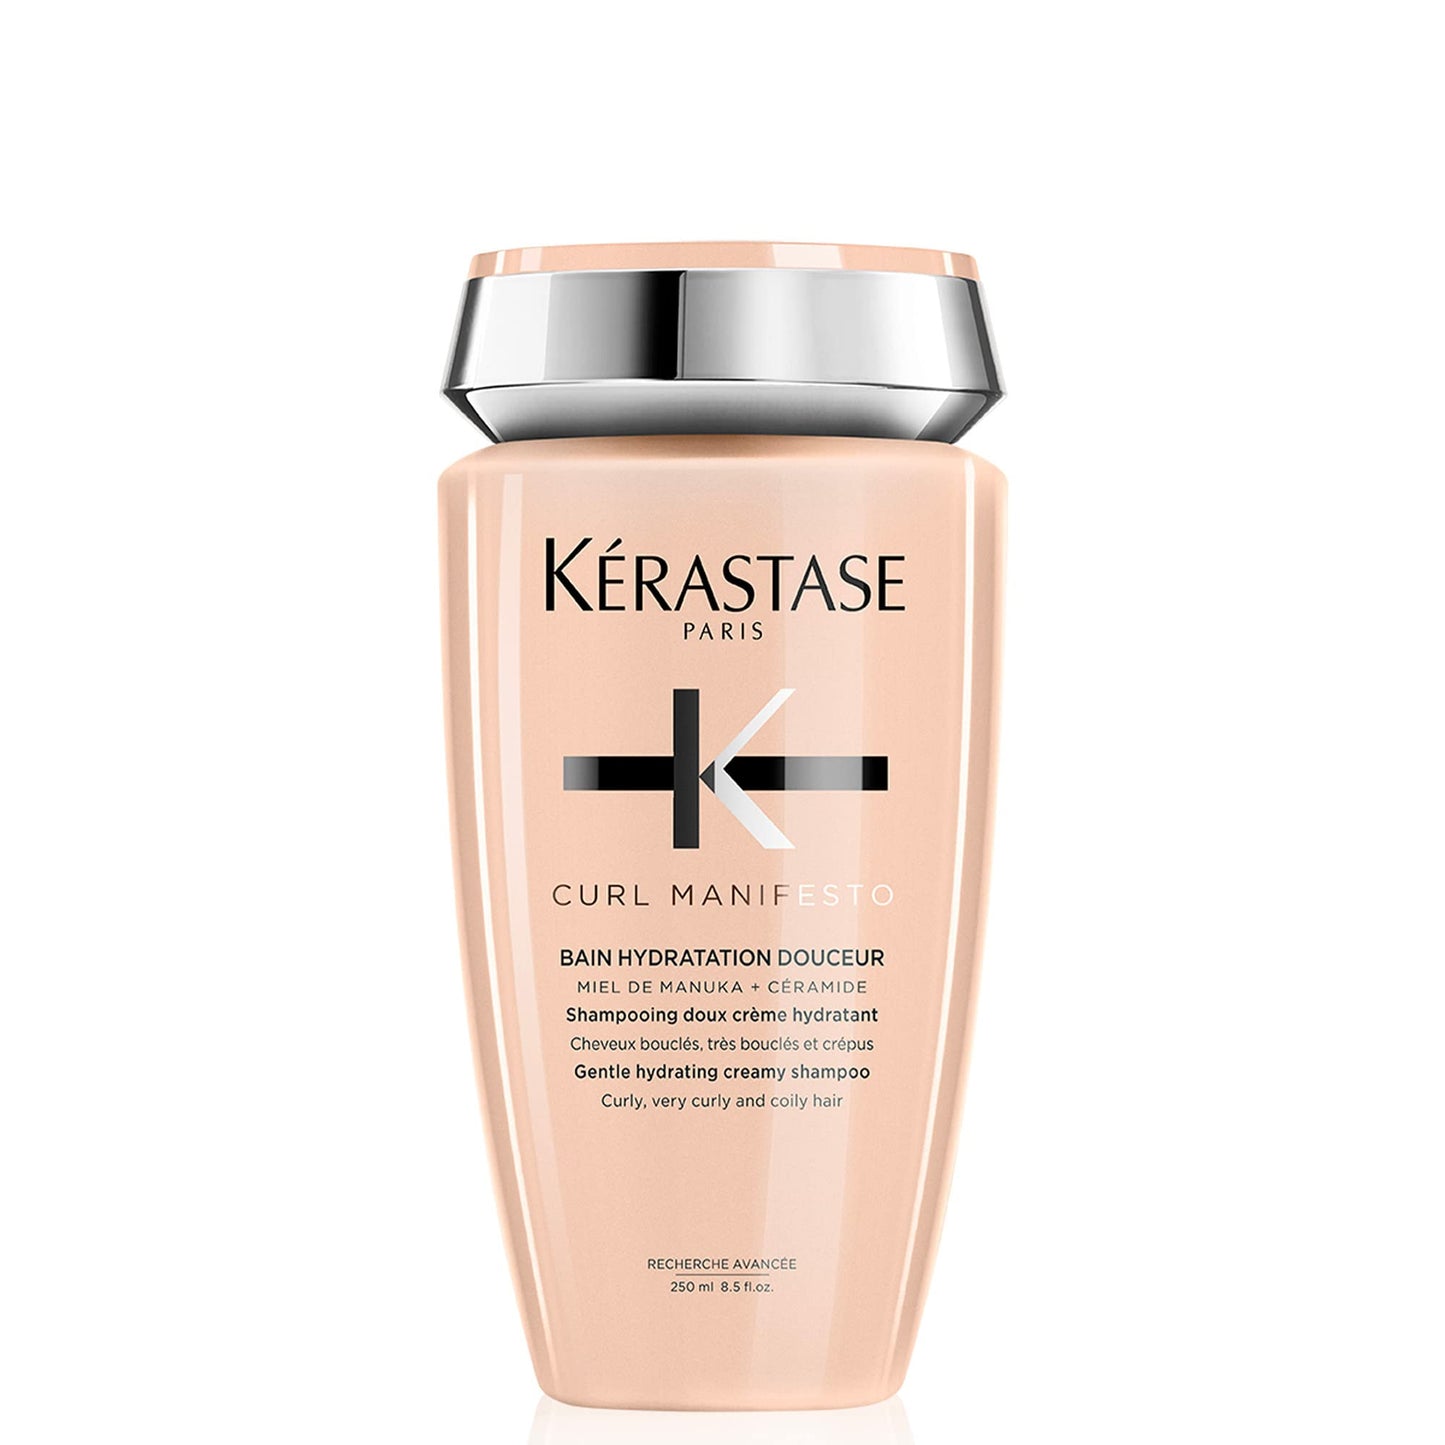 KERASTASE Curl Manifesto Hydratation Douceur Shampoo | Removes Build Up & Hydrates Curls | Softens & Reduces Frizz | For All Wavy, Curly, Very Curly & Coily Hair | 8.5 Fl Oz